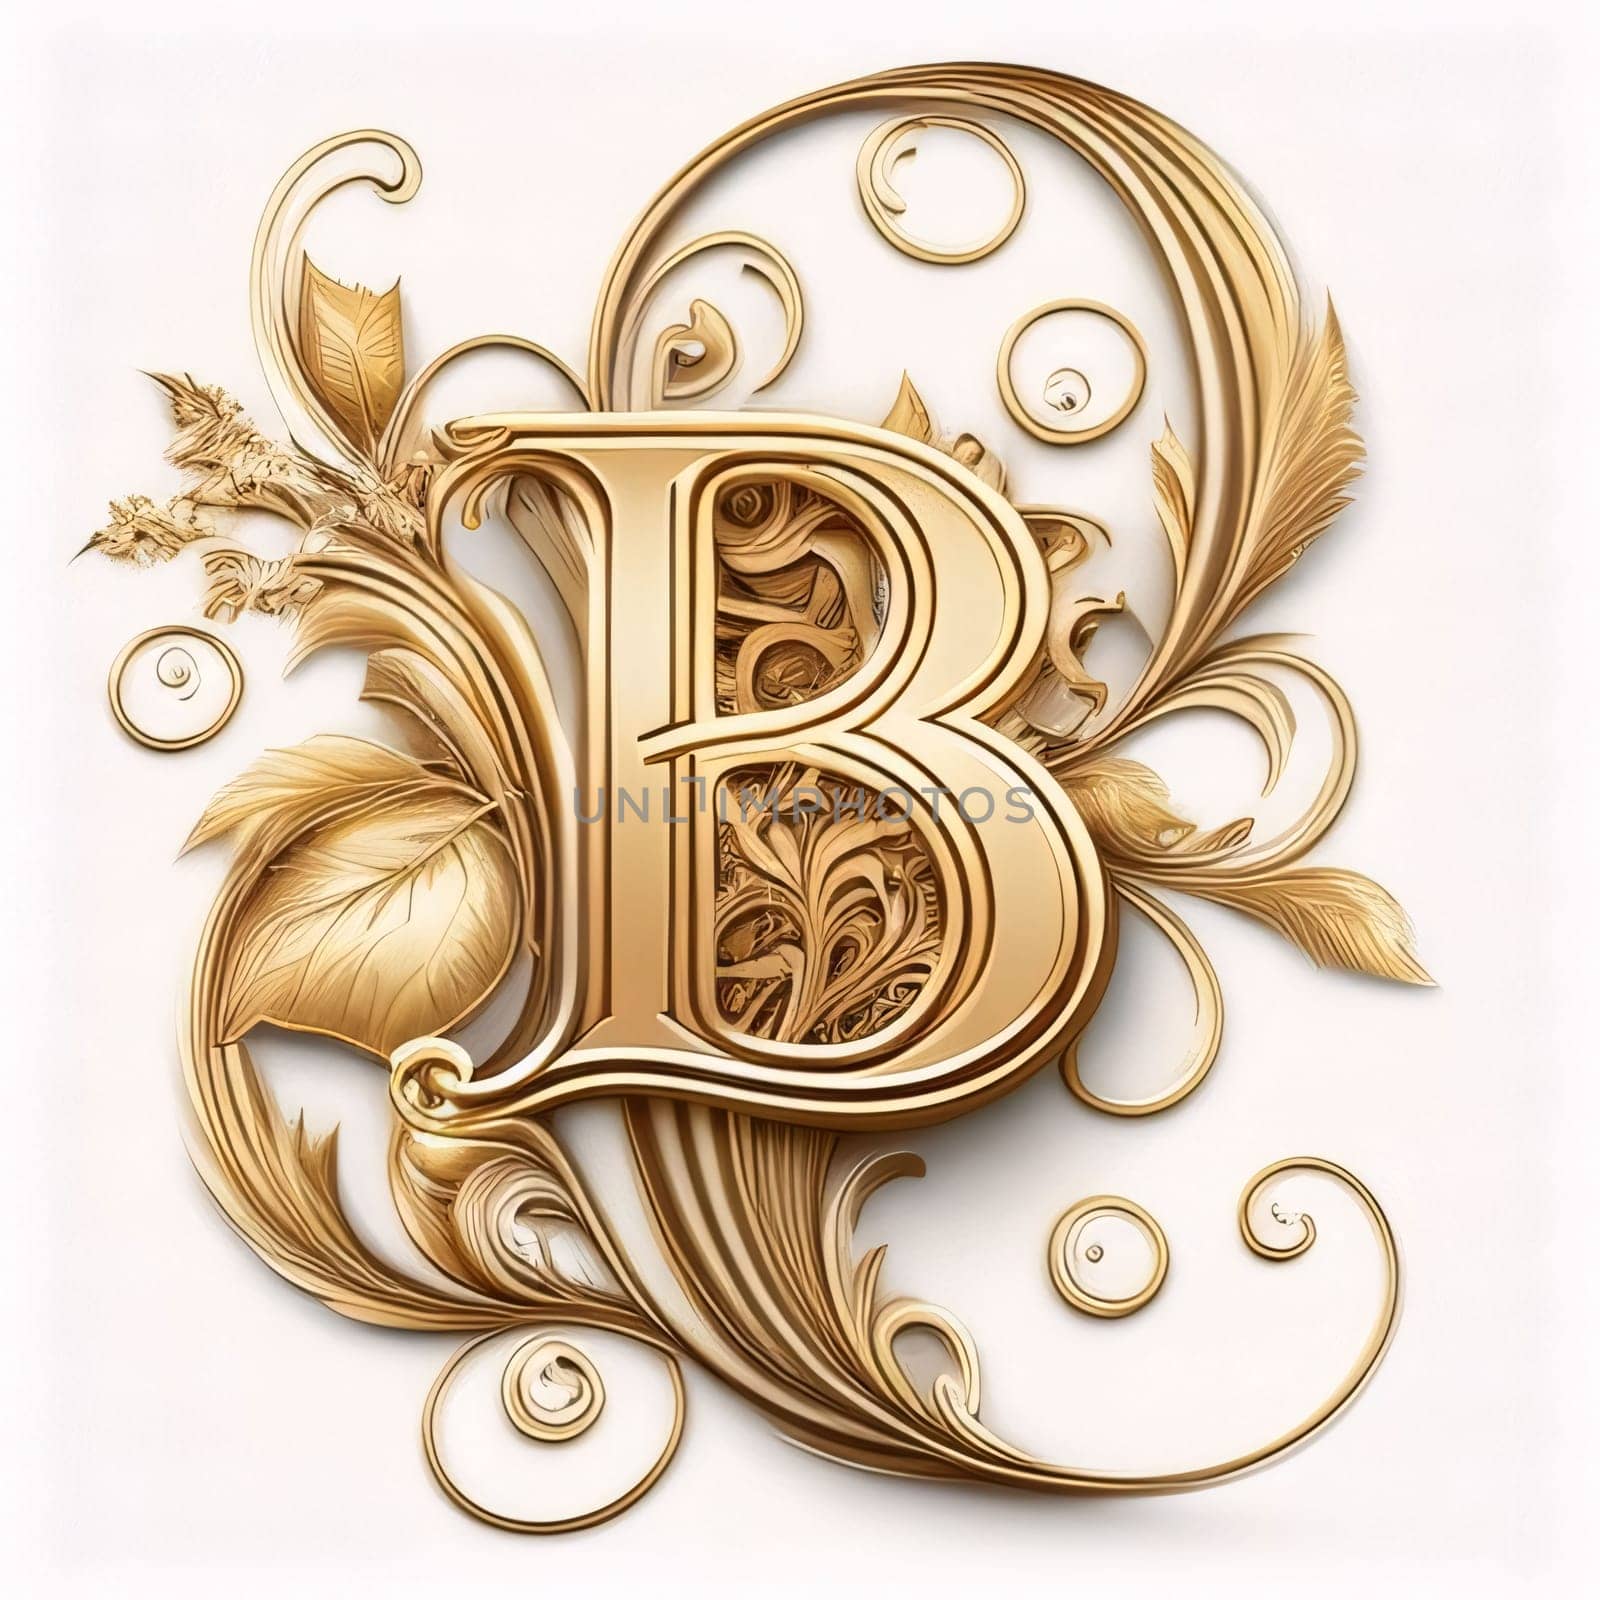 Graphic alphabet letters: Vintage monogram in Victorian style. Letter B. 3D rendering